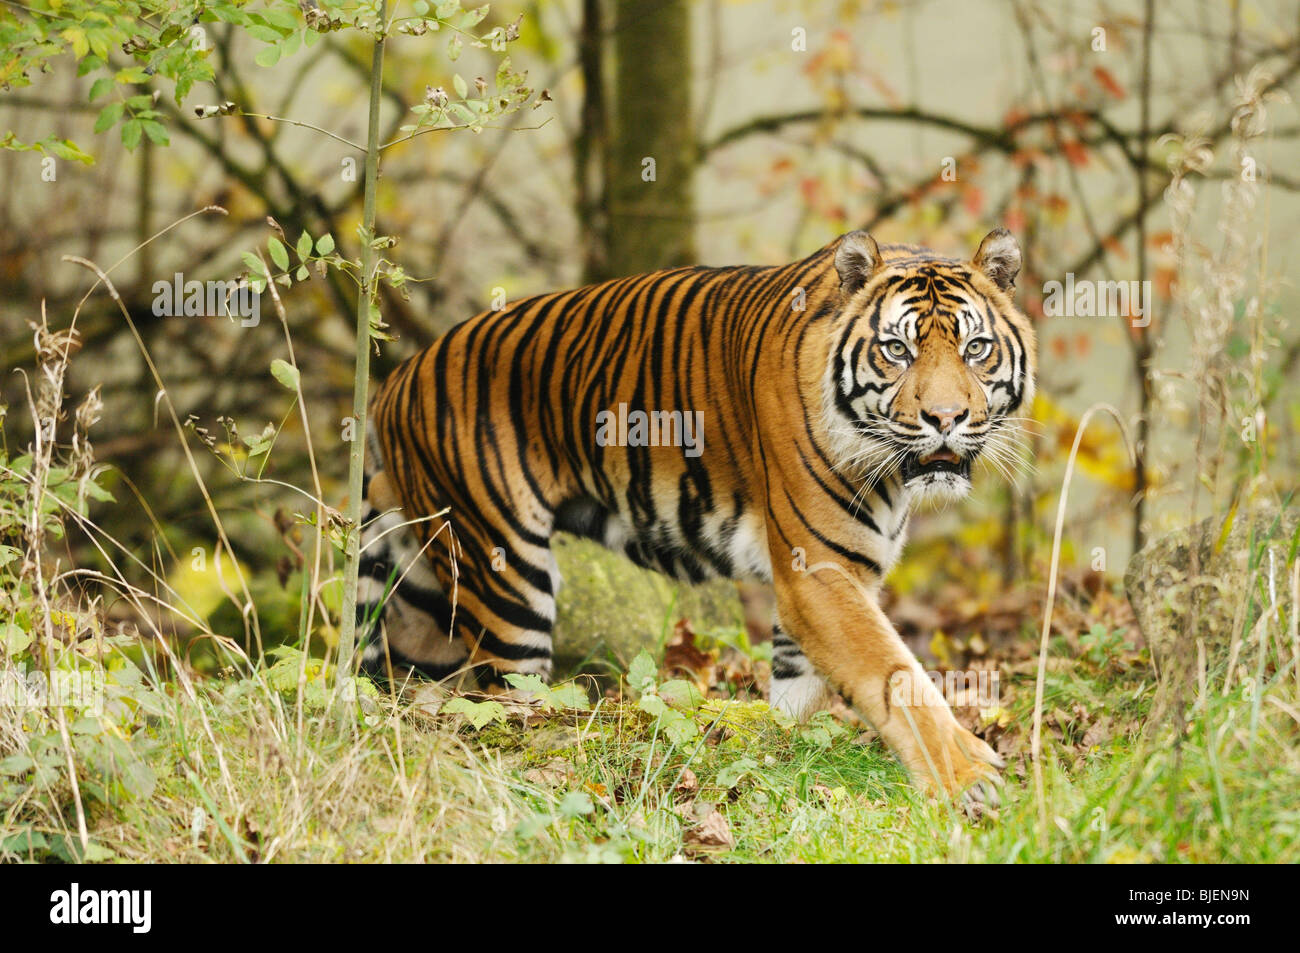 Siberian tiger (Panthera tigris altaica), zoological garden of Augsburg, Germany Stock Photo